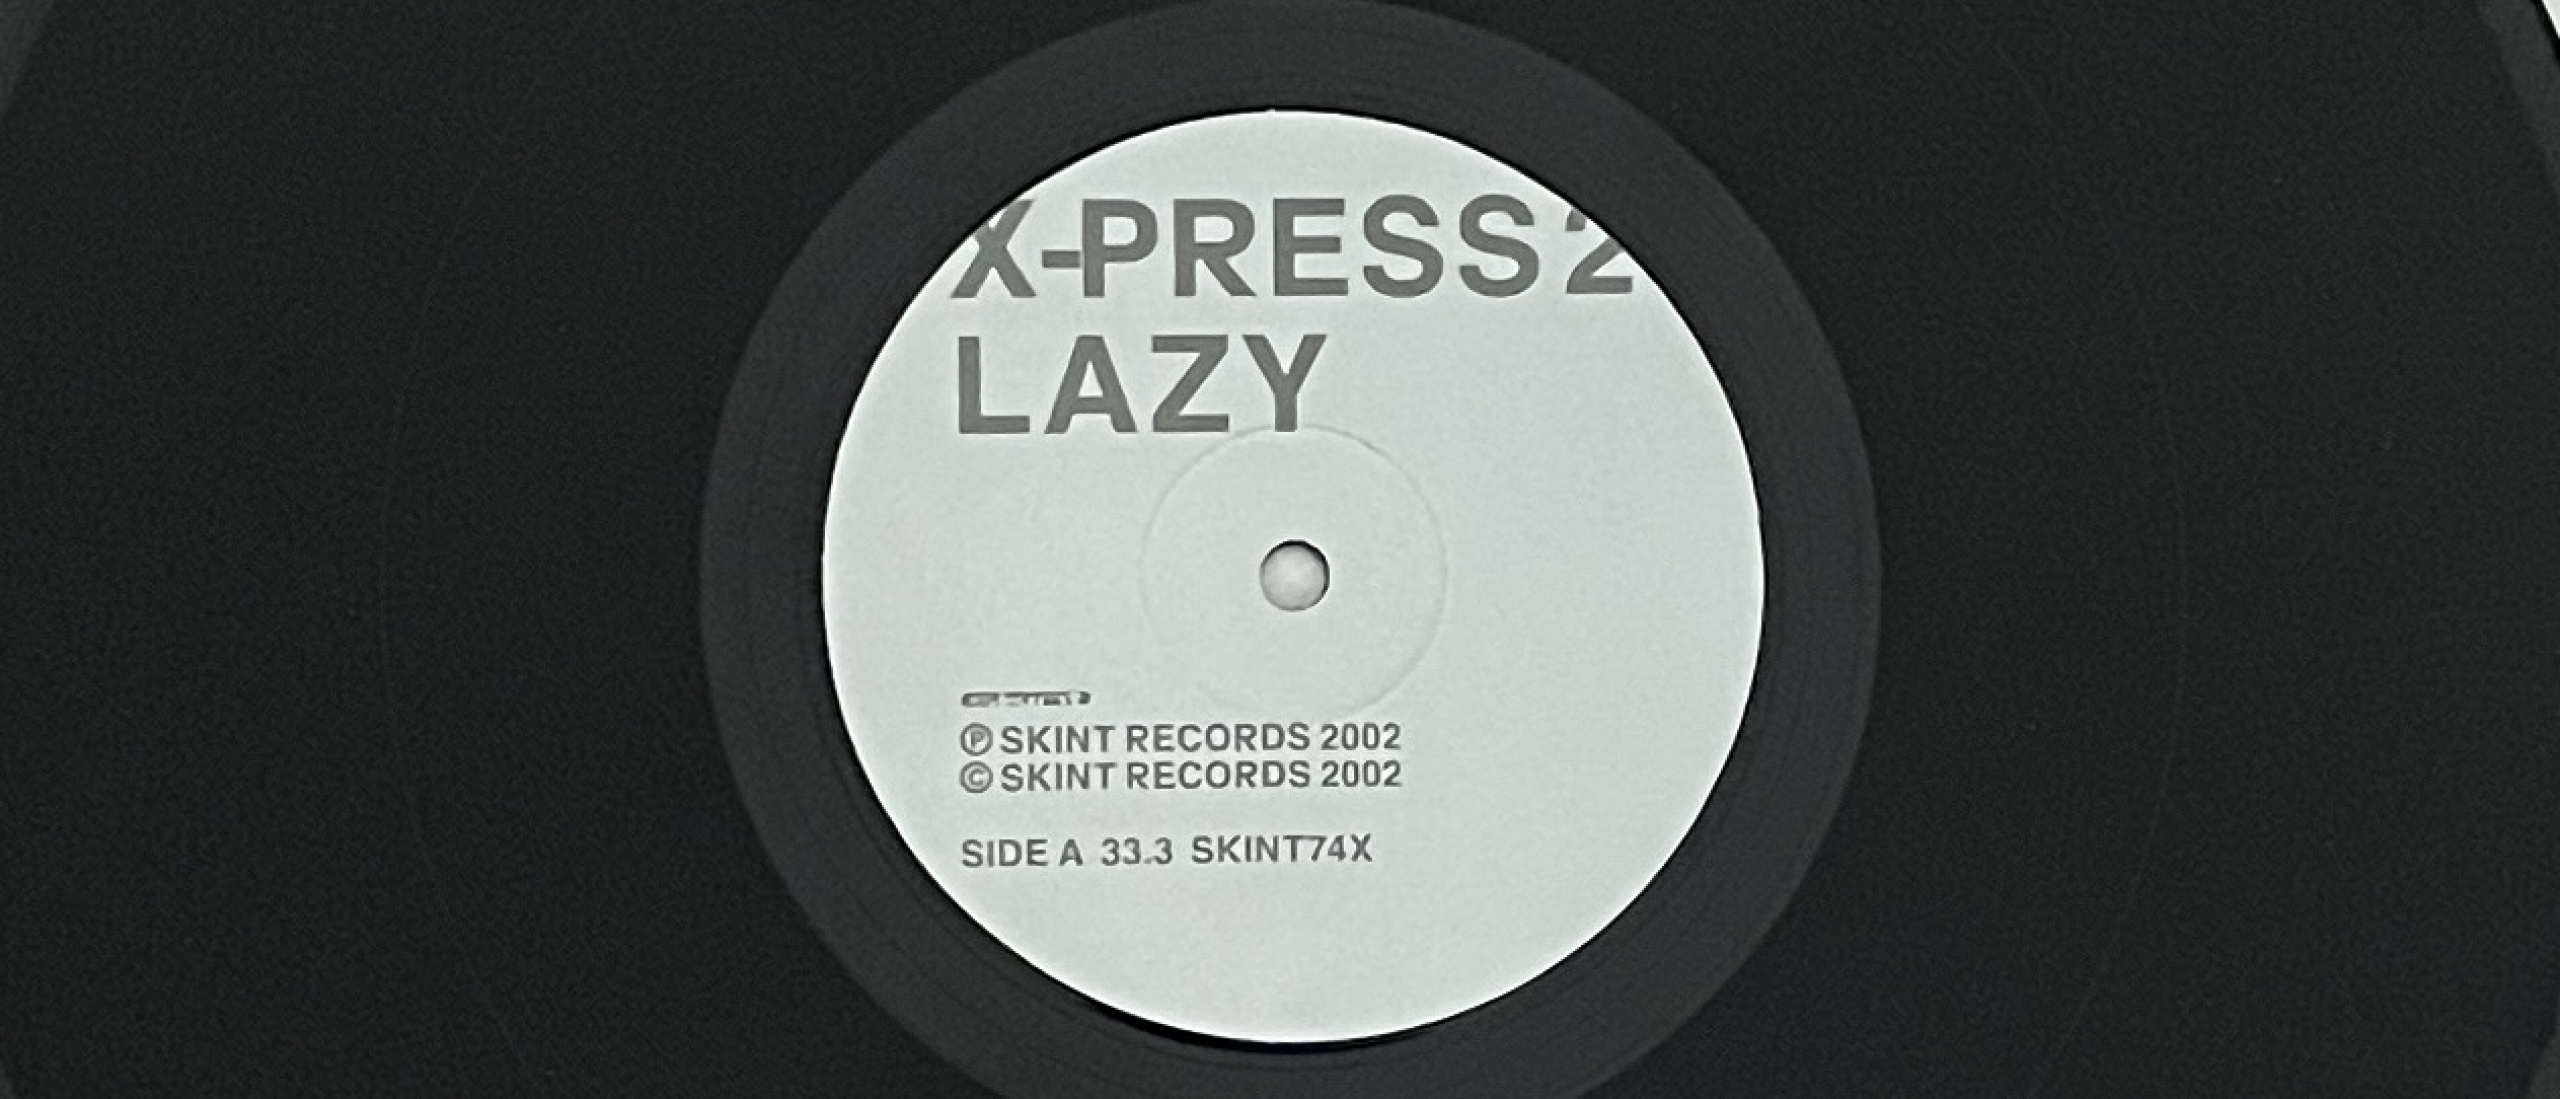 Forgotten Song Friday X-Press 2 featuring David Byrne Lazy